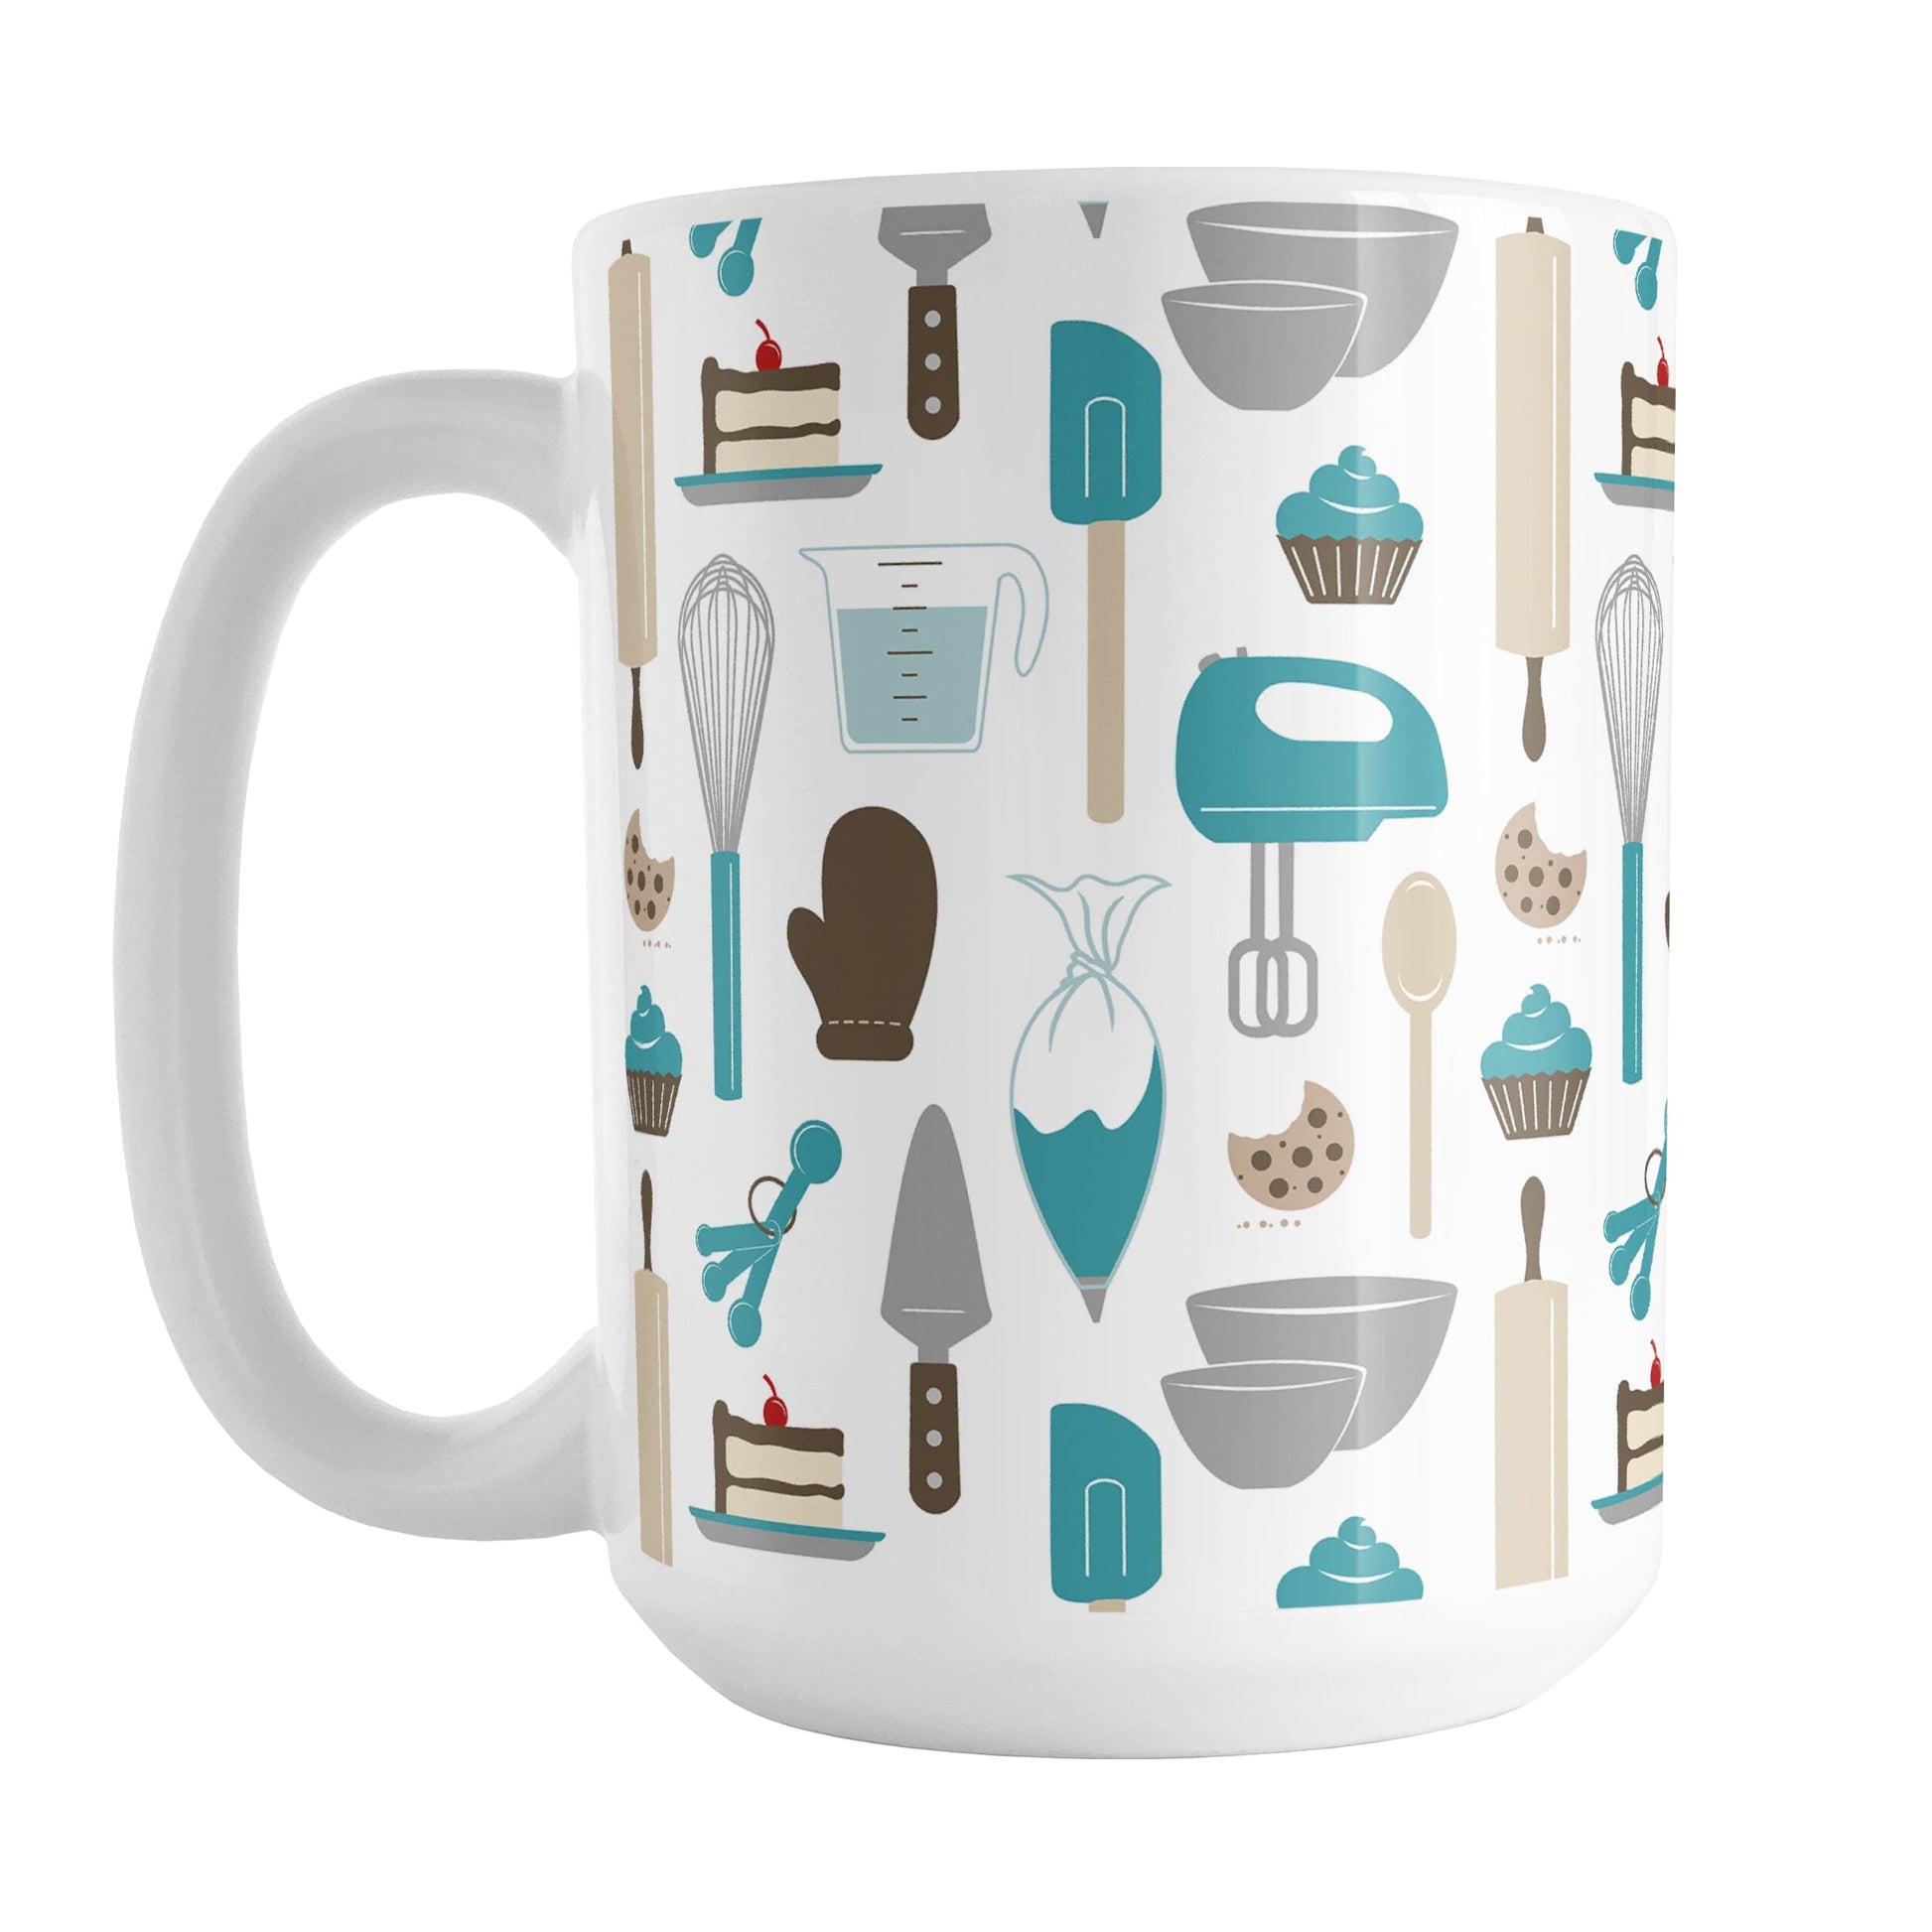 Turquoise Baking Pattern Mug (15oz) at Amy's Coffee Mugs. A ceramic coffee mug designed with a pattern of baking tools like spatulas, whisks, mixers, bowls, and spoons, with cookies, cupcakes, and cake all in a turquoise, gray, brown, and beige color scheme that wraps around the mug.